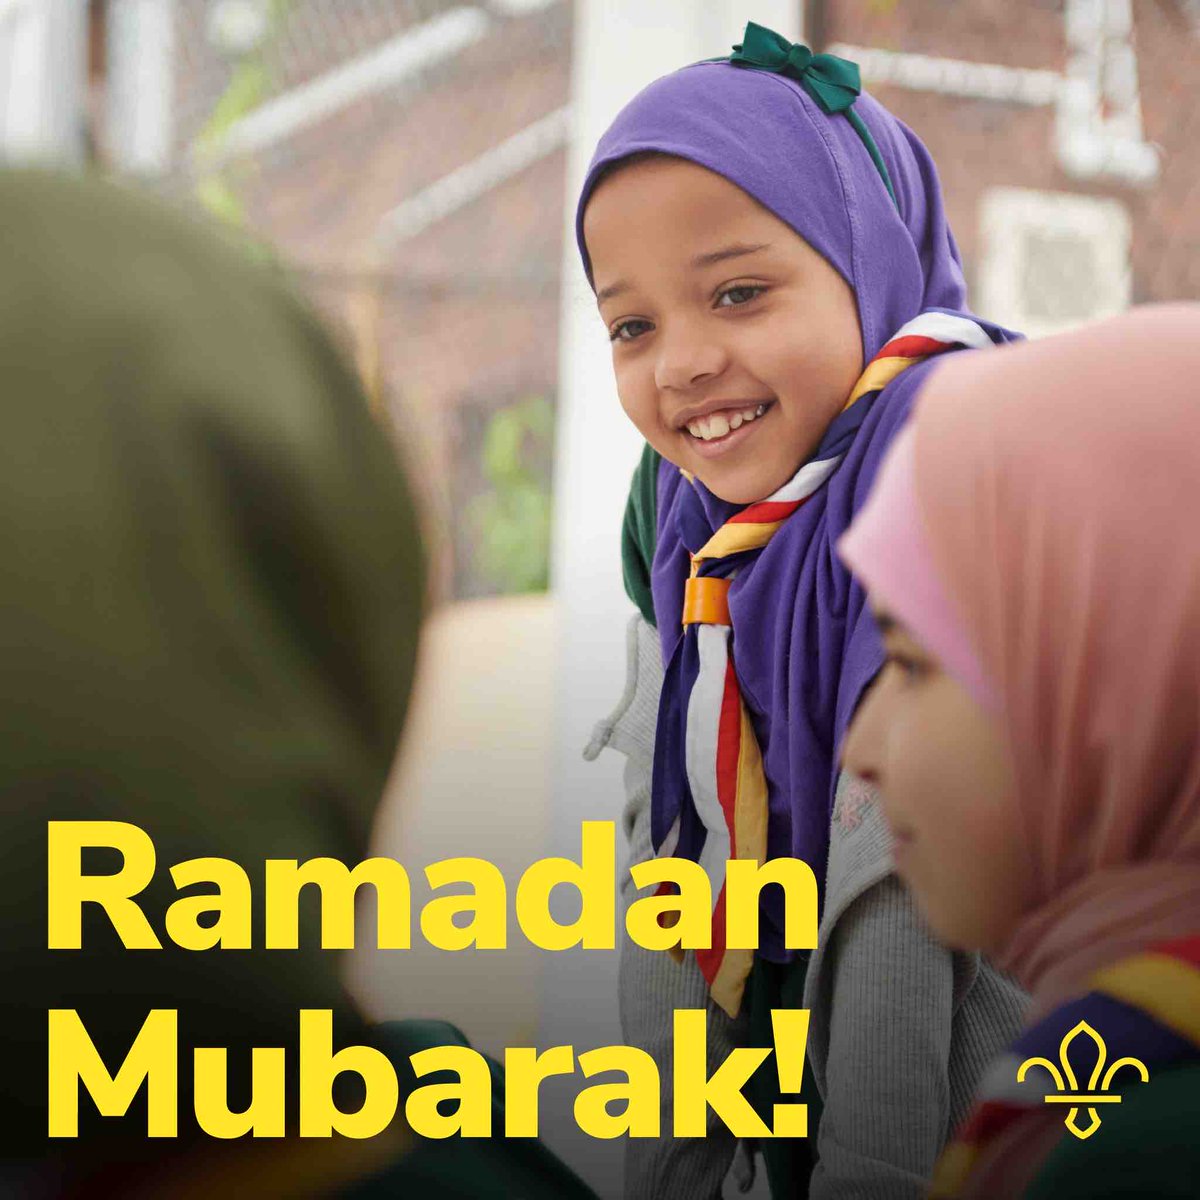 Ramadan Mubarak! 🌙✨ Take a look at ways you can make sure everyone’s included in Scouts, even while fasting. bit.ly/4c6sG3K